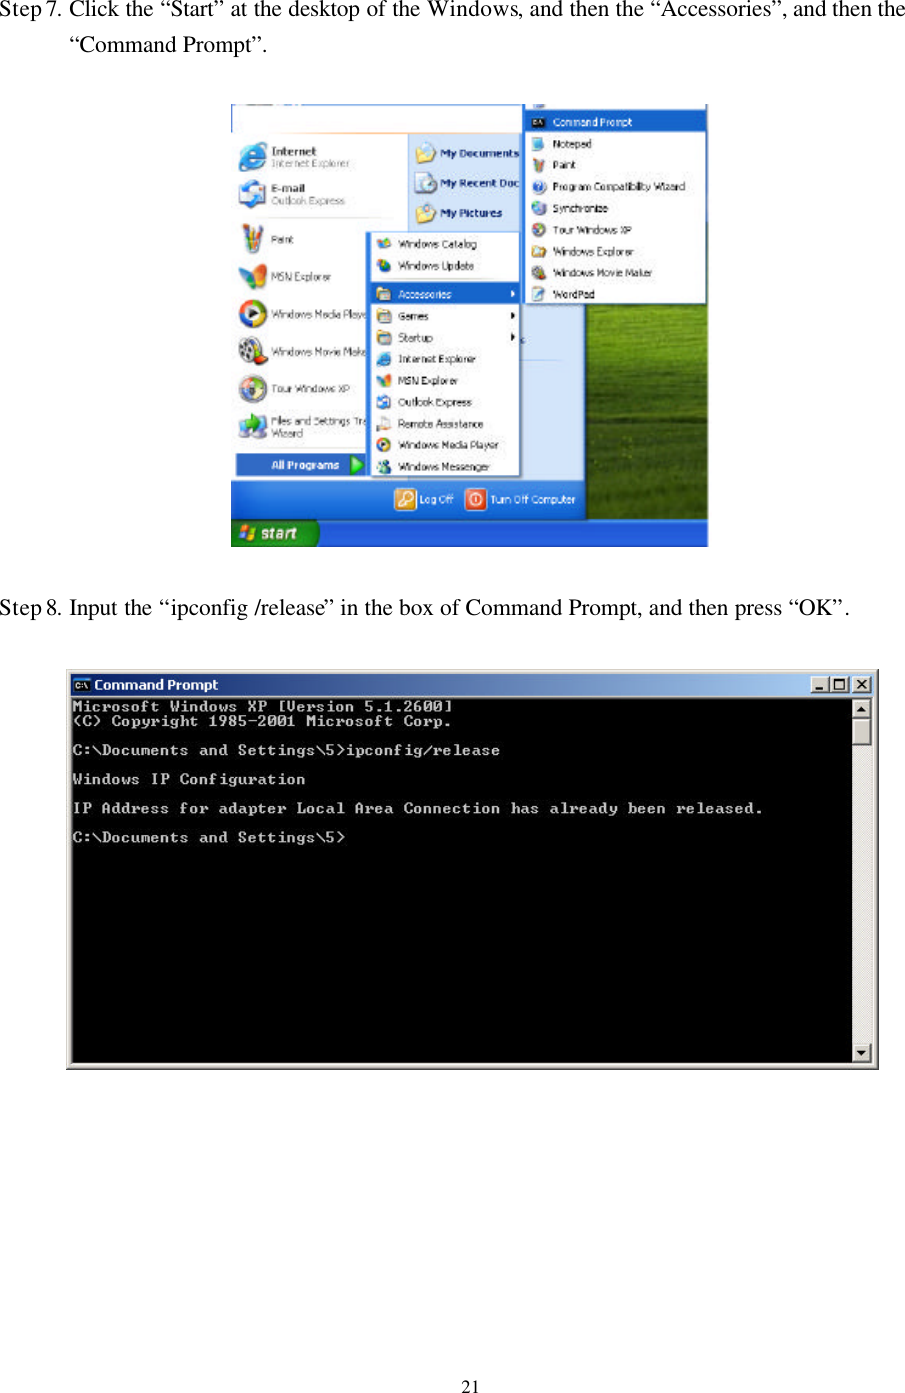   21 Step 7. Click the “Start” at the desktop of the Windows, and then the “Accessories”, and then the “Command Prompt”.    Step 8. Input the “ipconfig /release” in the box of Command Prompt, and then press “OK”.           